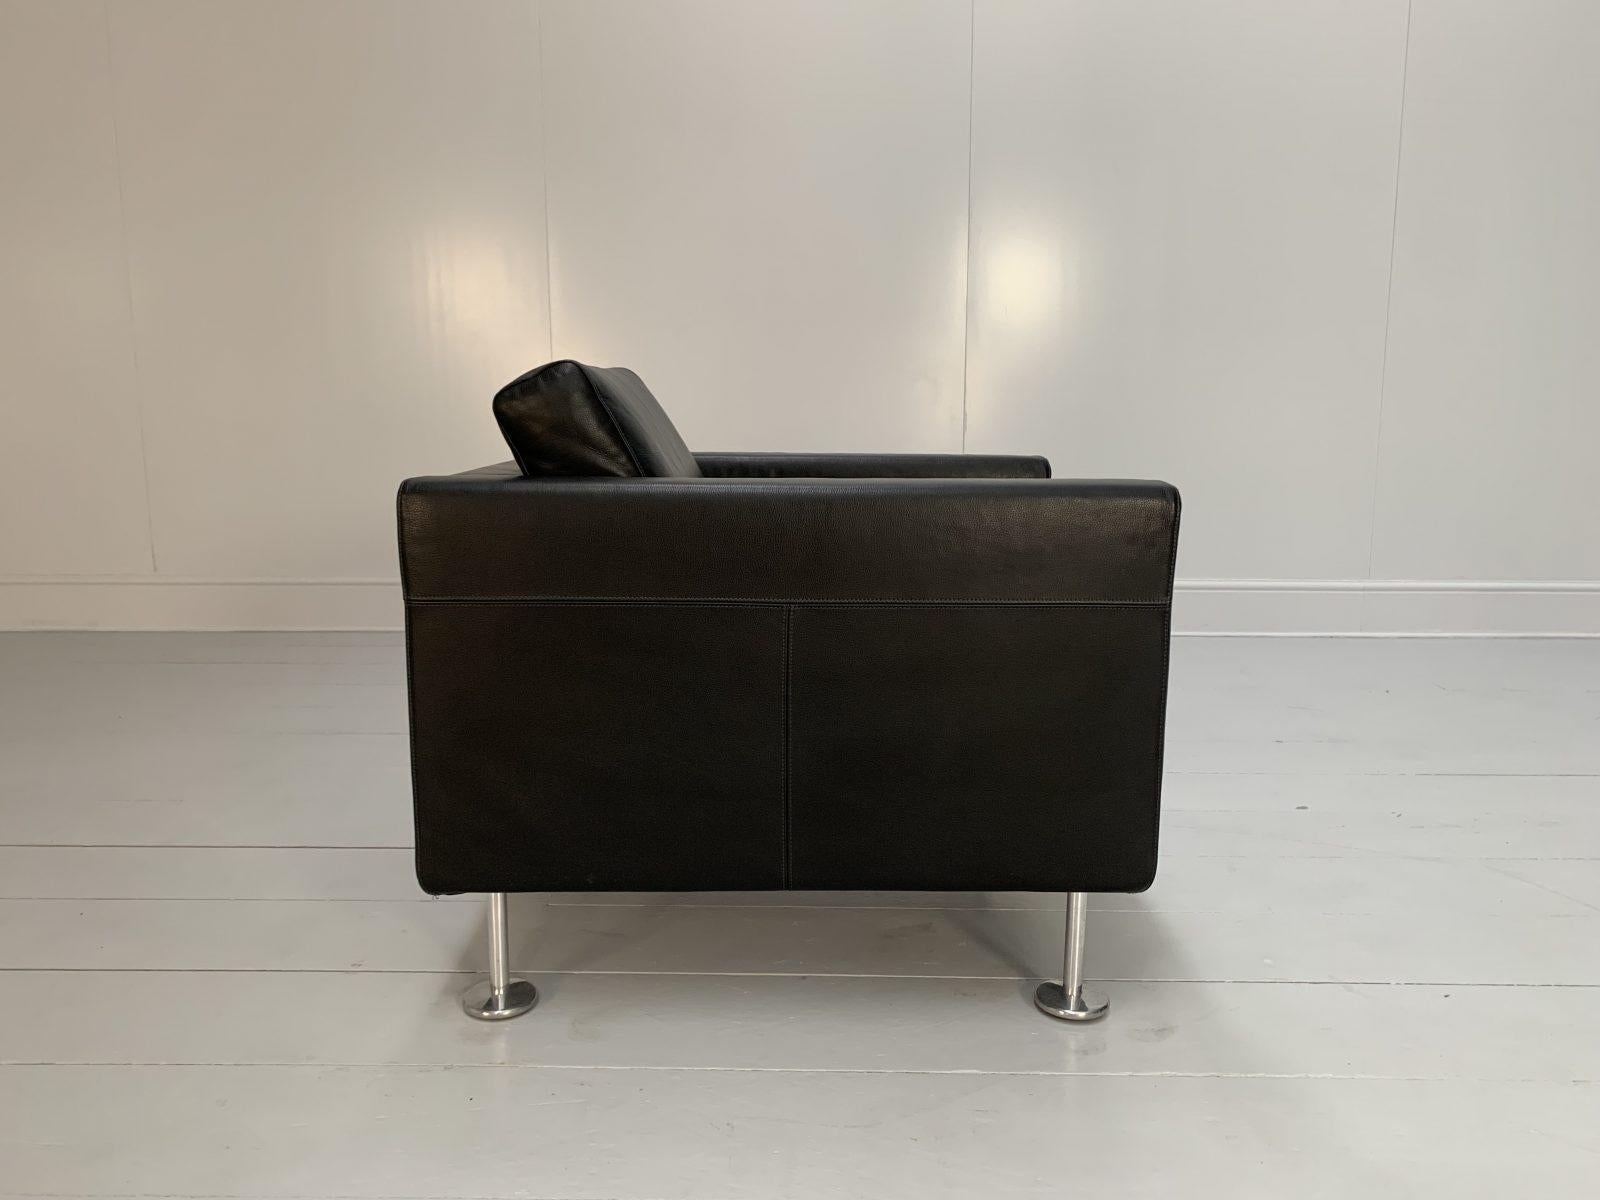 Contemporary Vitra “Park” Armchair – In Jet Black Leather For Sale